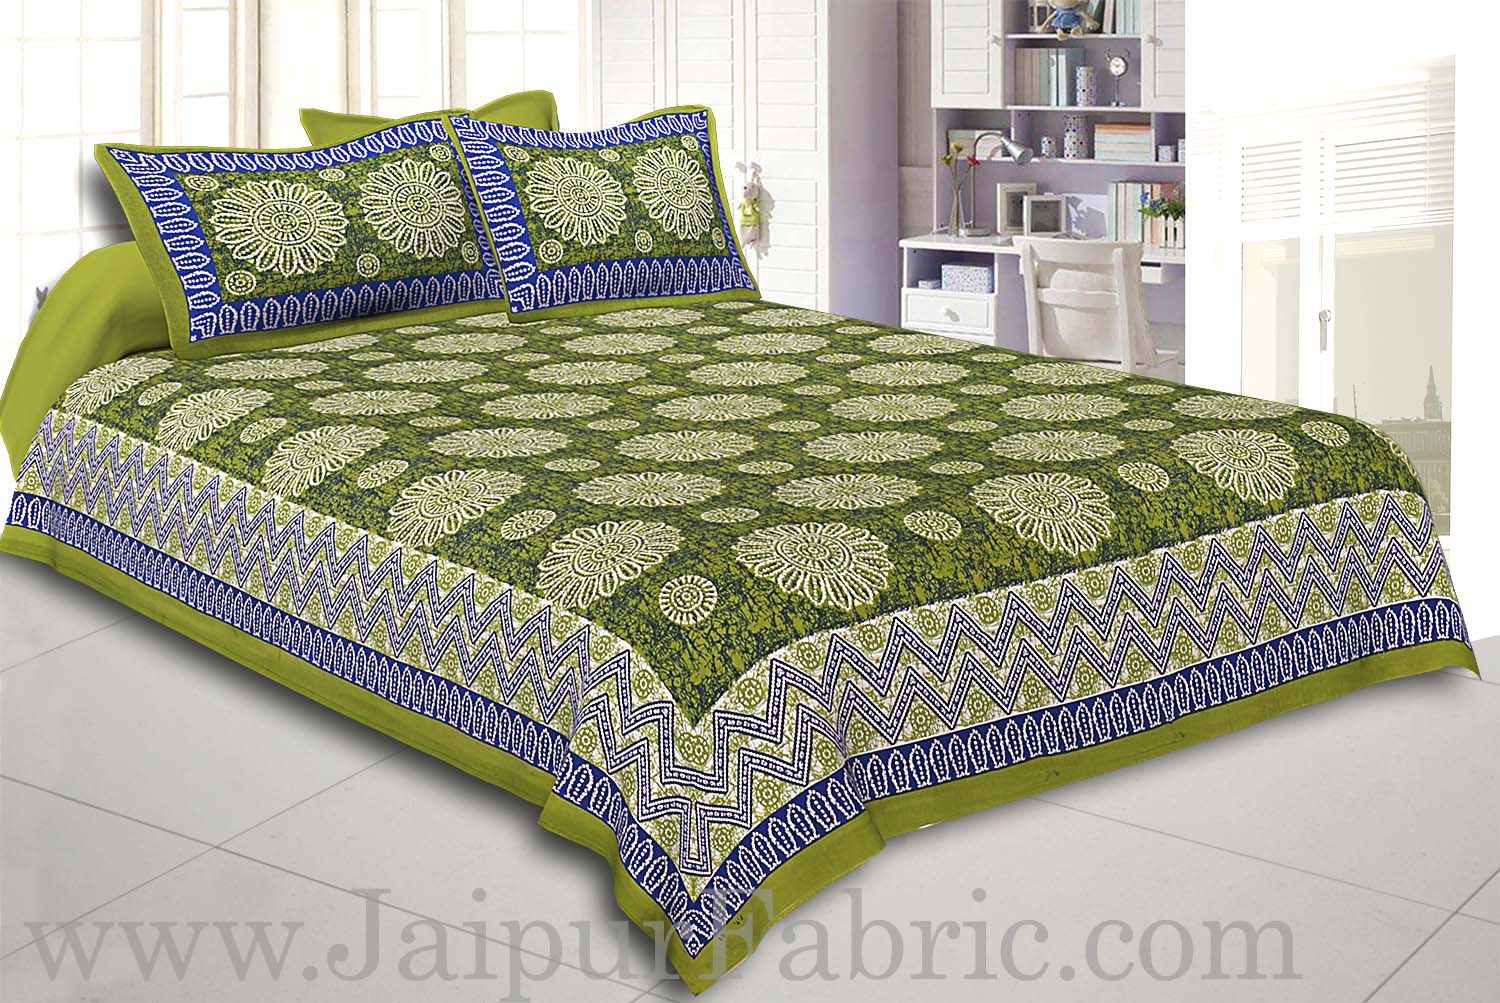 Green Border With Zig Zag Pattern Green Blue Base With White Flowers Print Coton Double Bedsheet